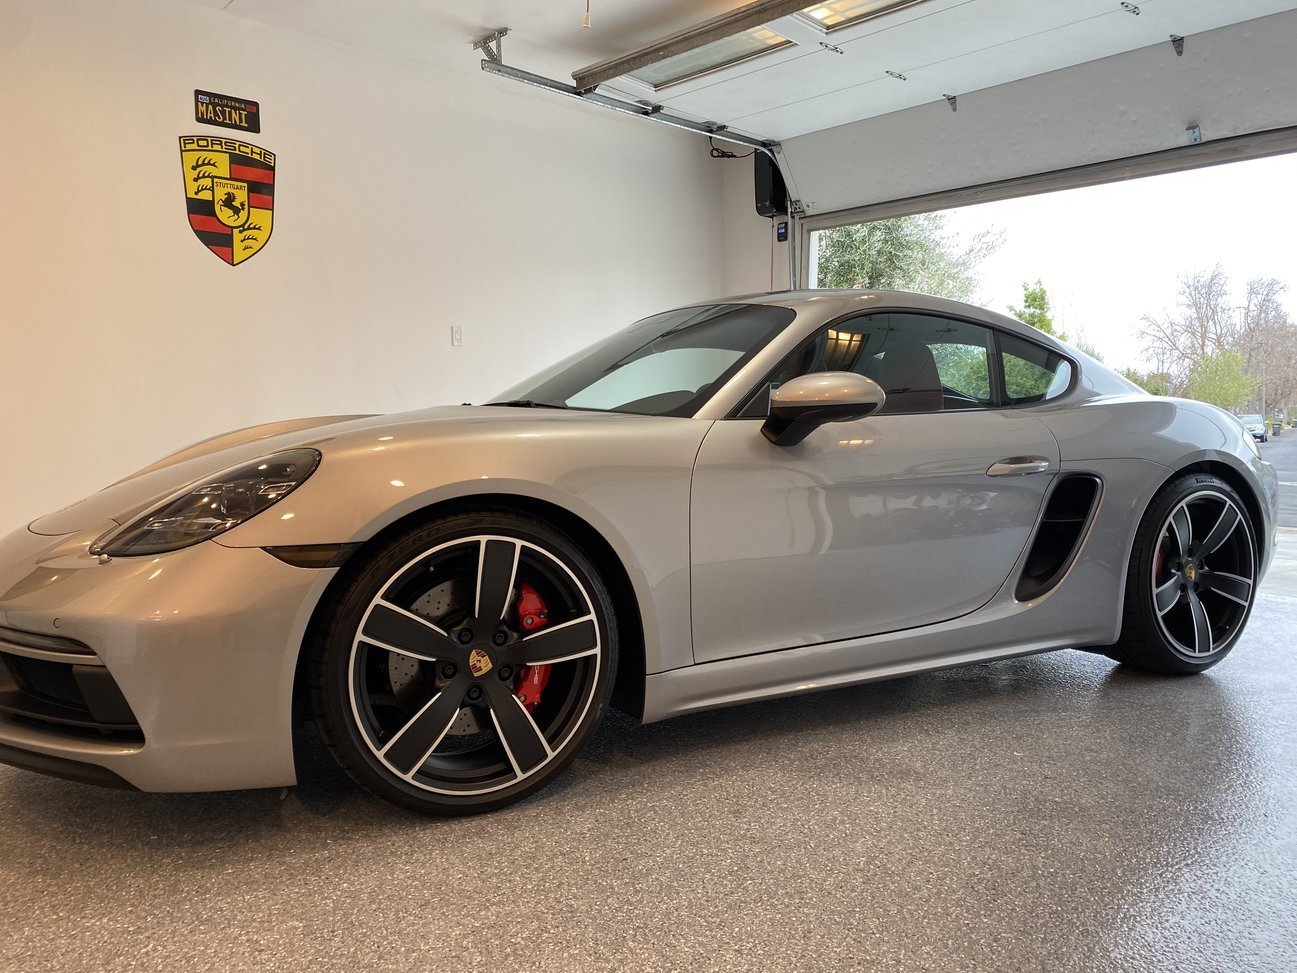 Pictures of GTS  with Carrera Sport wheels - Rennlist - Porsche  Discussion Forums